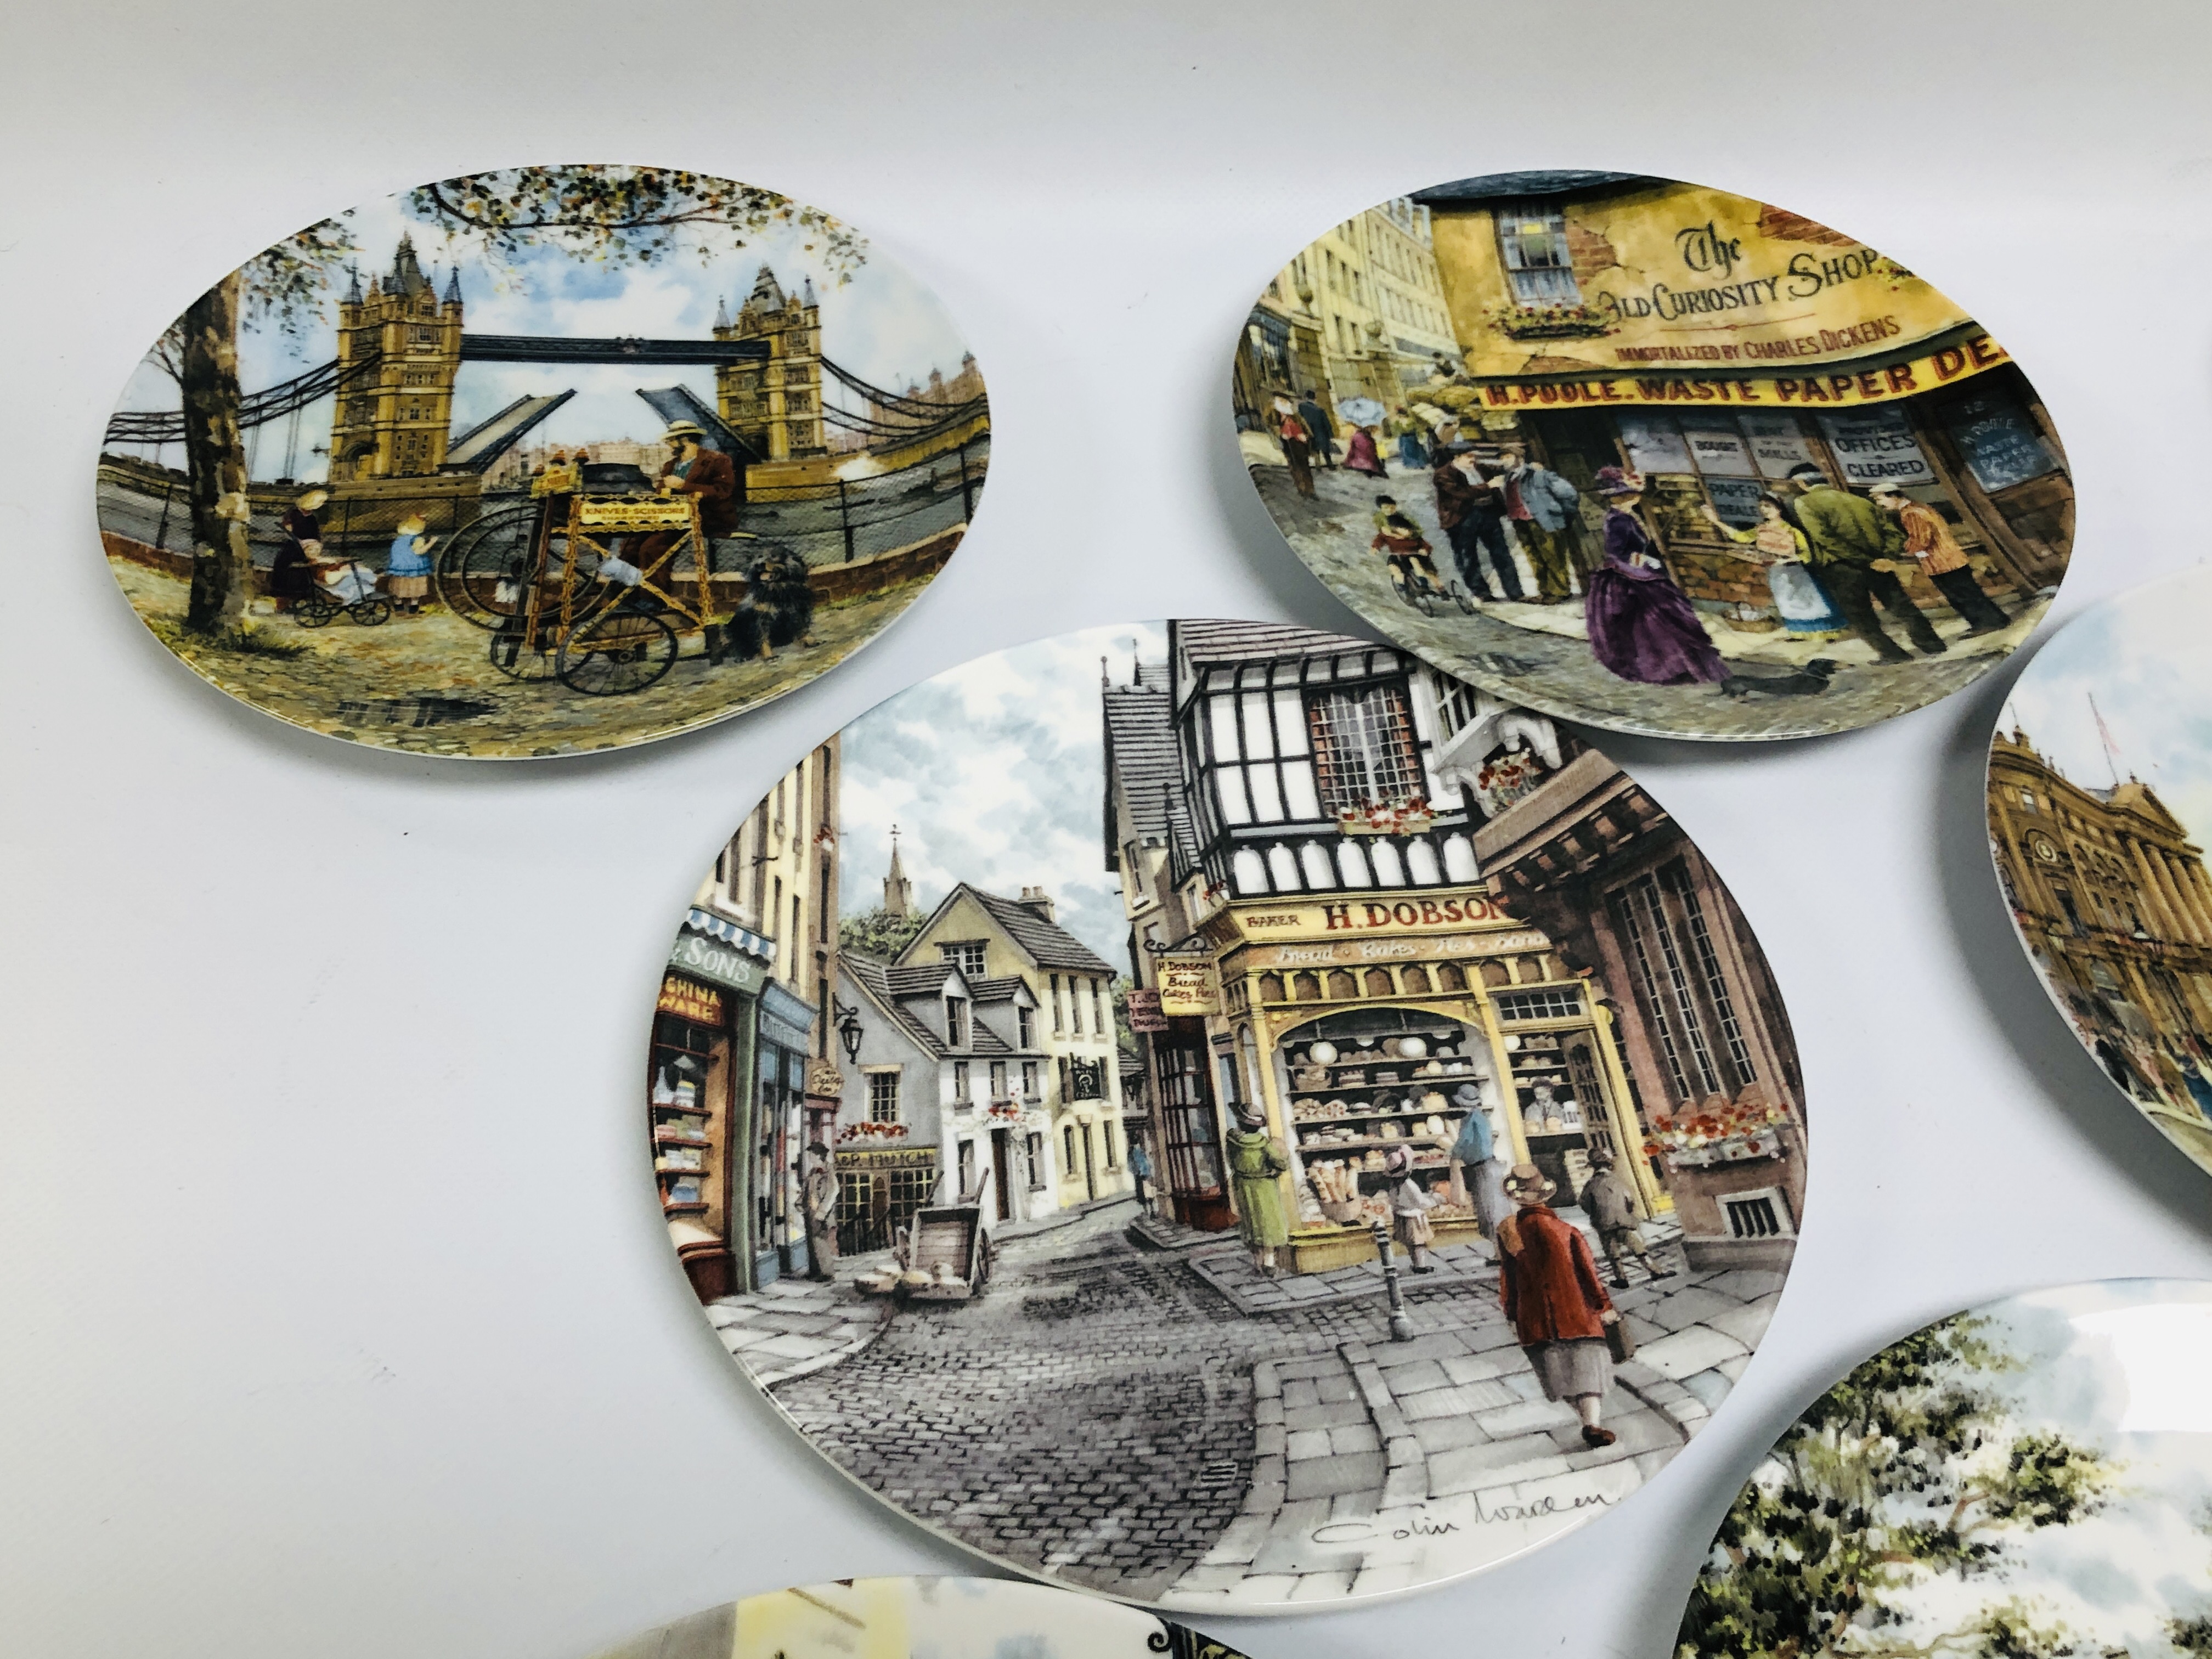 4 X DAVENPORT COLLECTORS PLATES "CRIES OF LONDON" SERIES WITH BOXES + 2 WITHOUT BOXES + 6 X ROYAL - Image 2 of 8